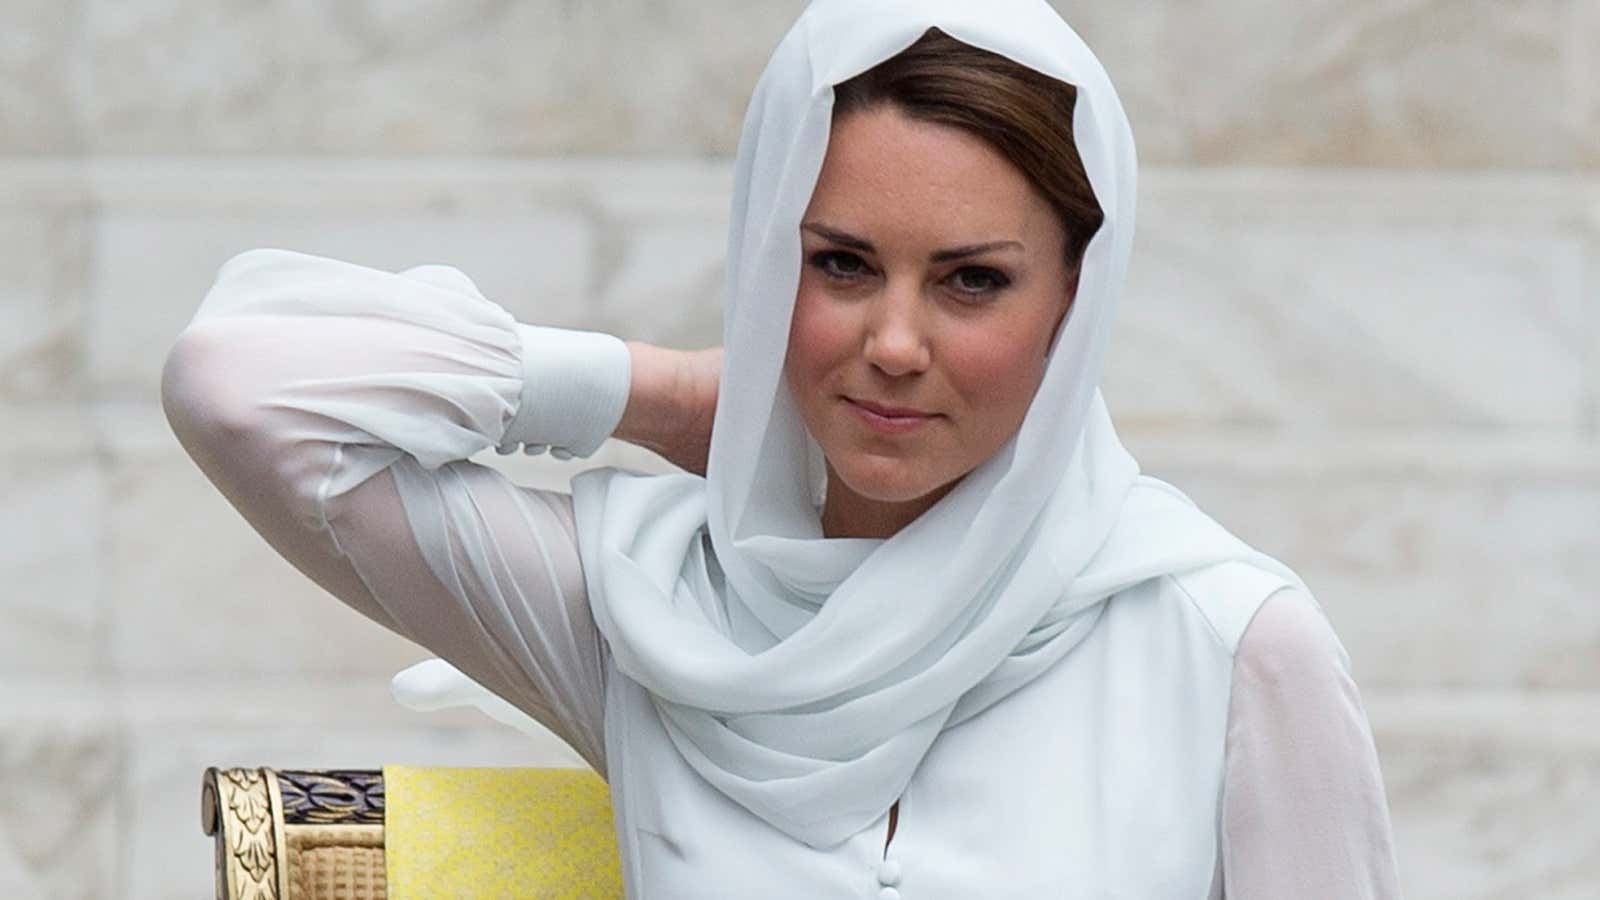 Protecting Kate Middleton’s modesty is an international affair.